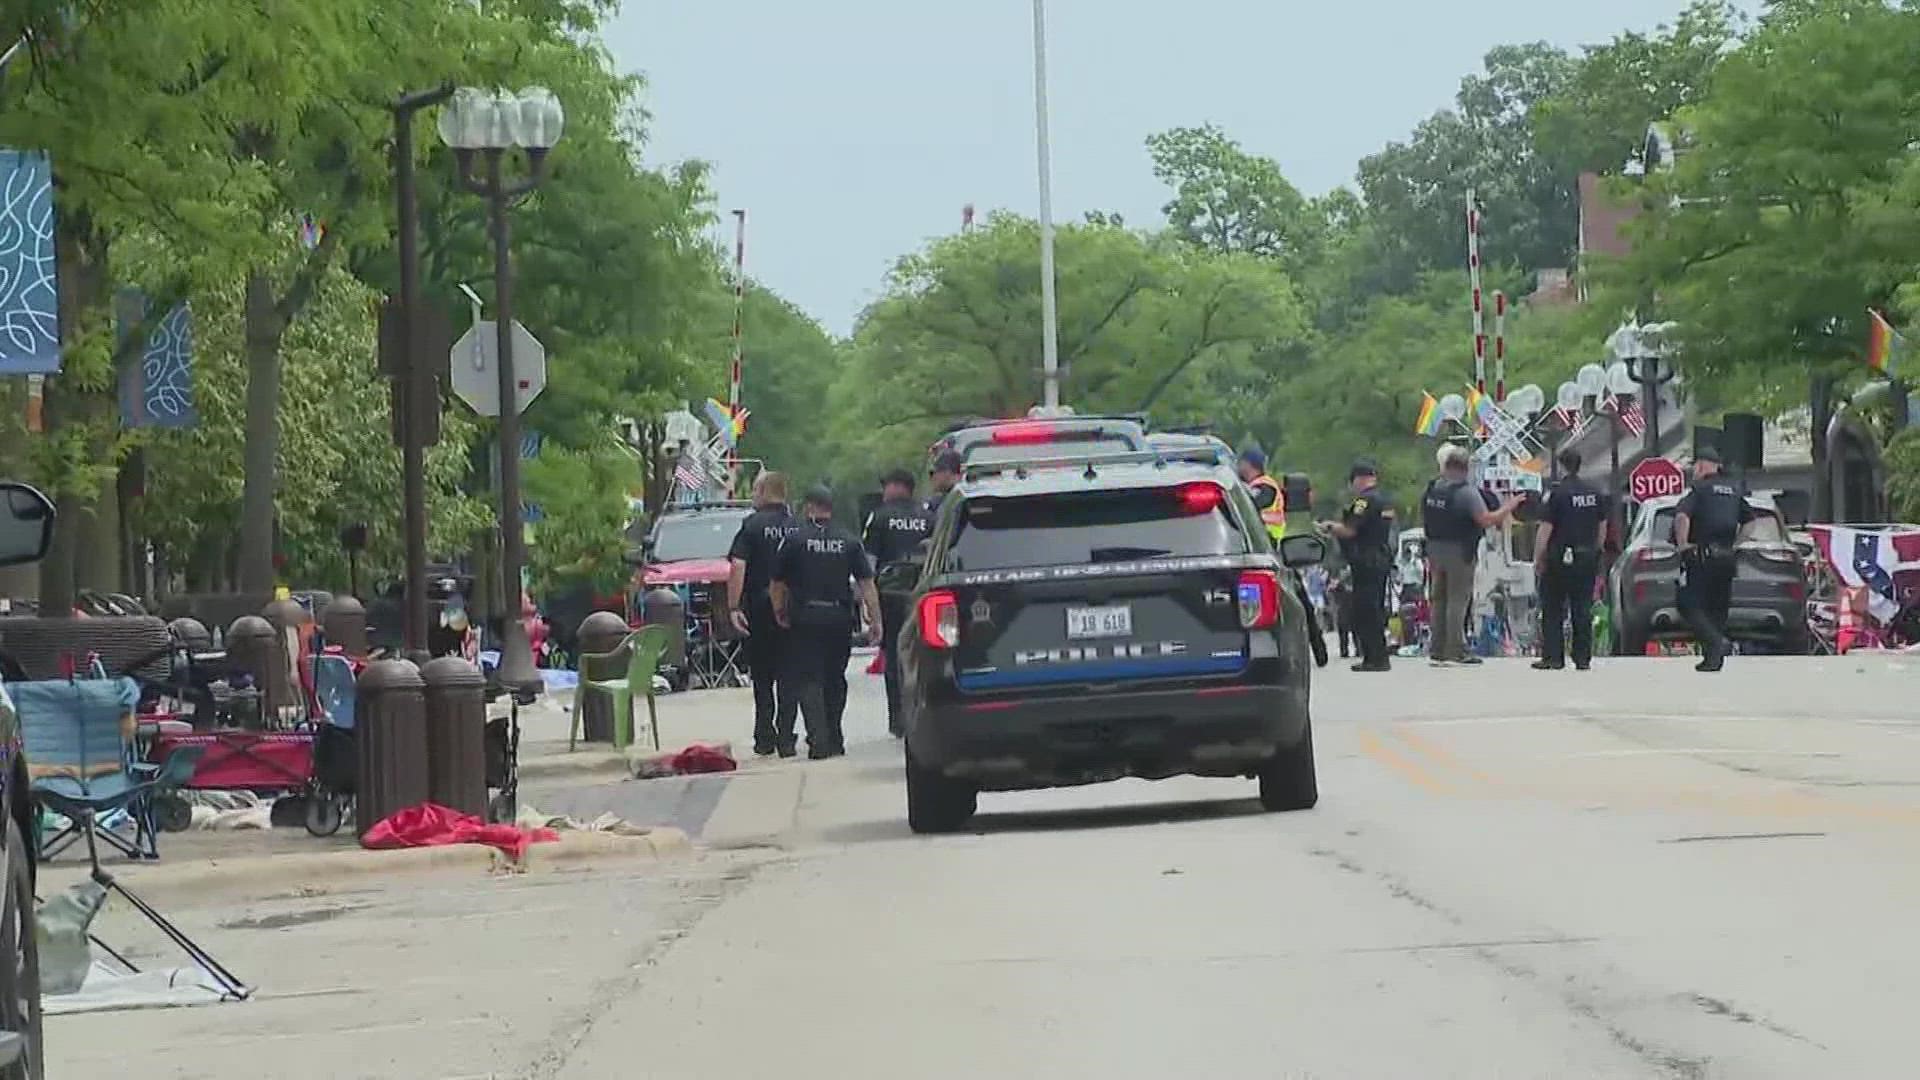 Authorities are still searching for the gunman who opened fire on the parade in Highland Park.